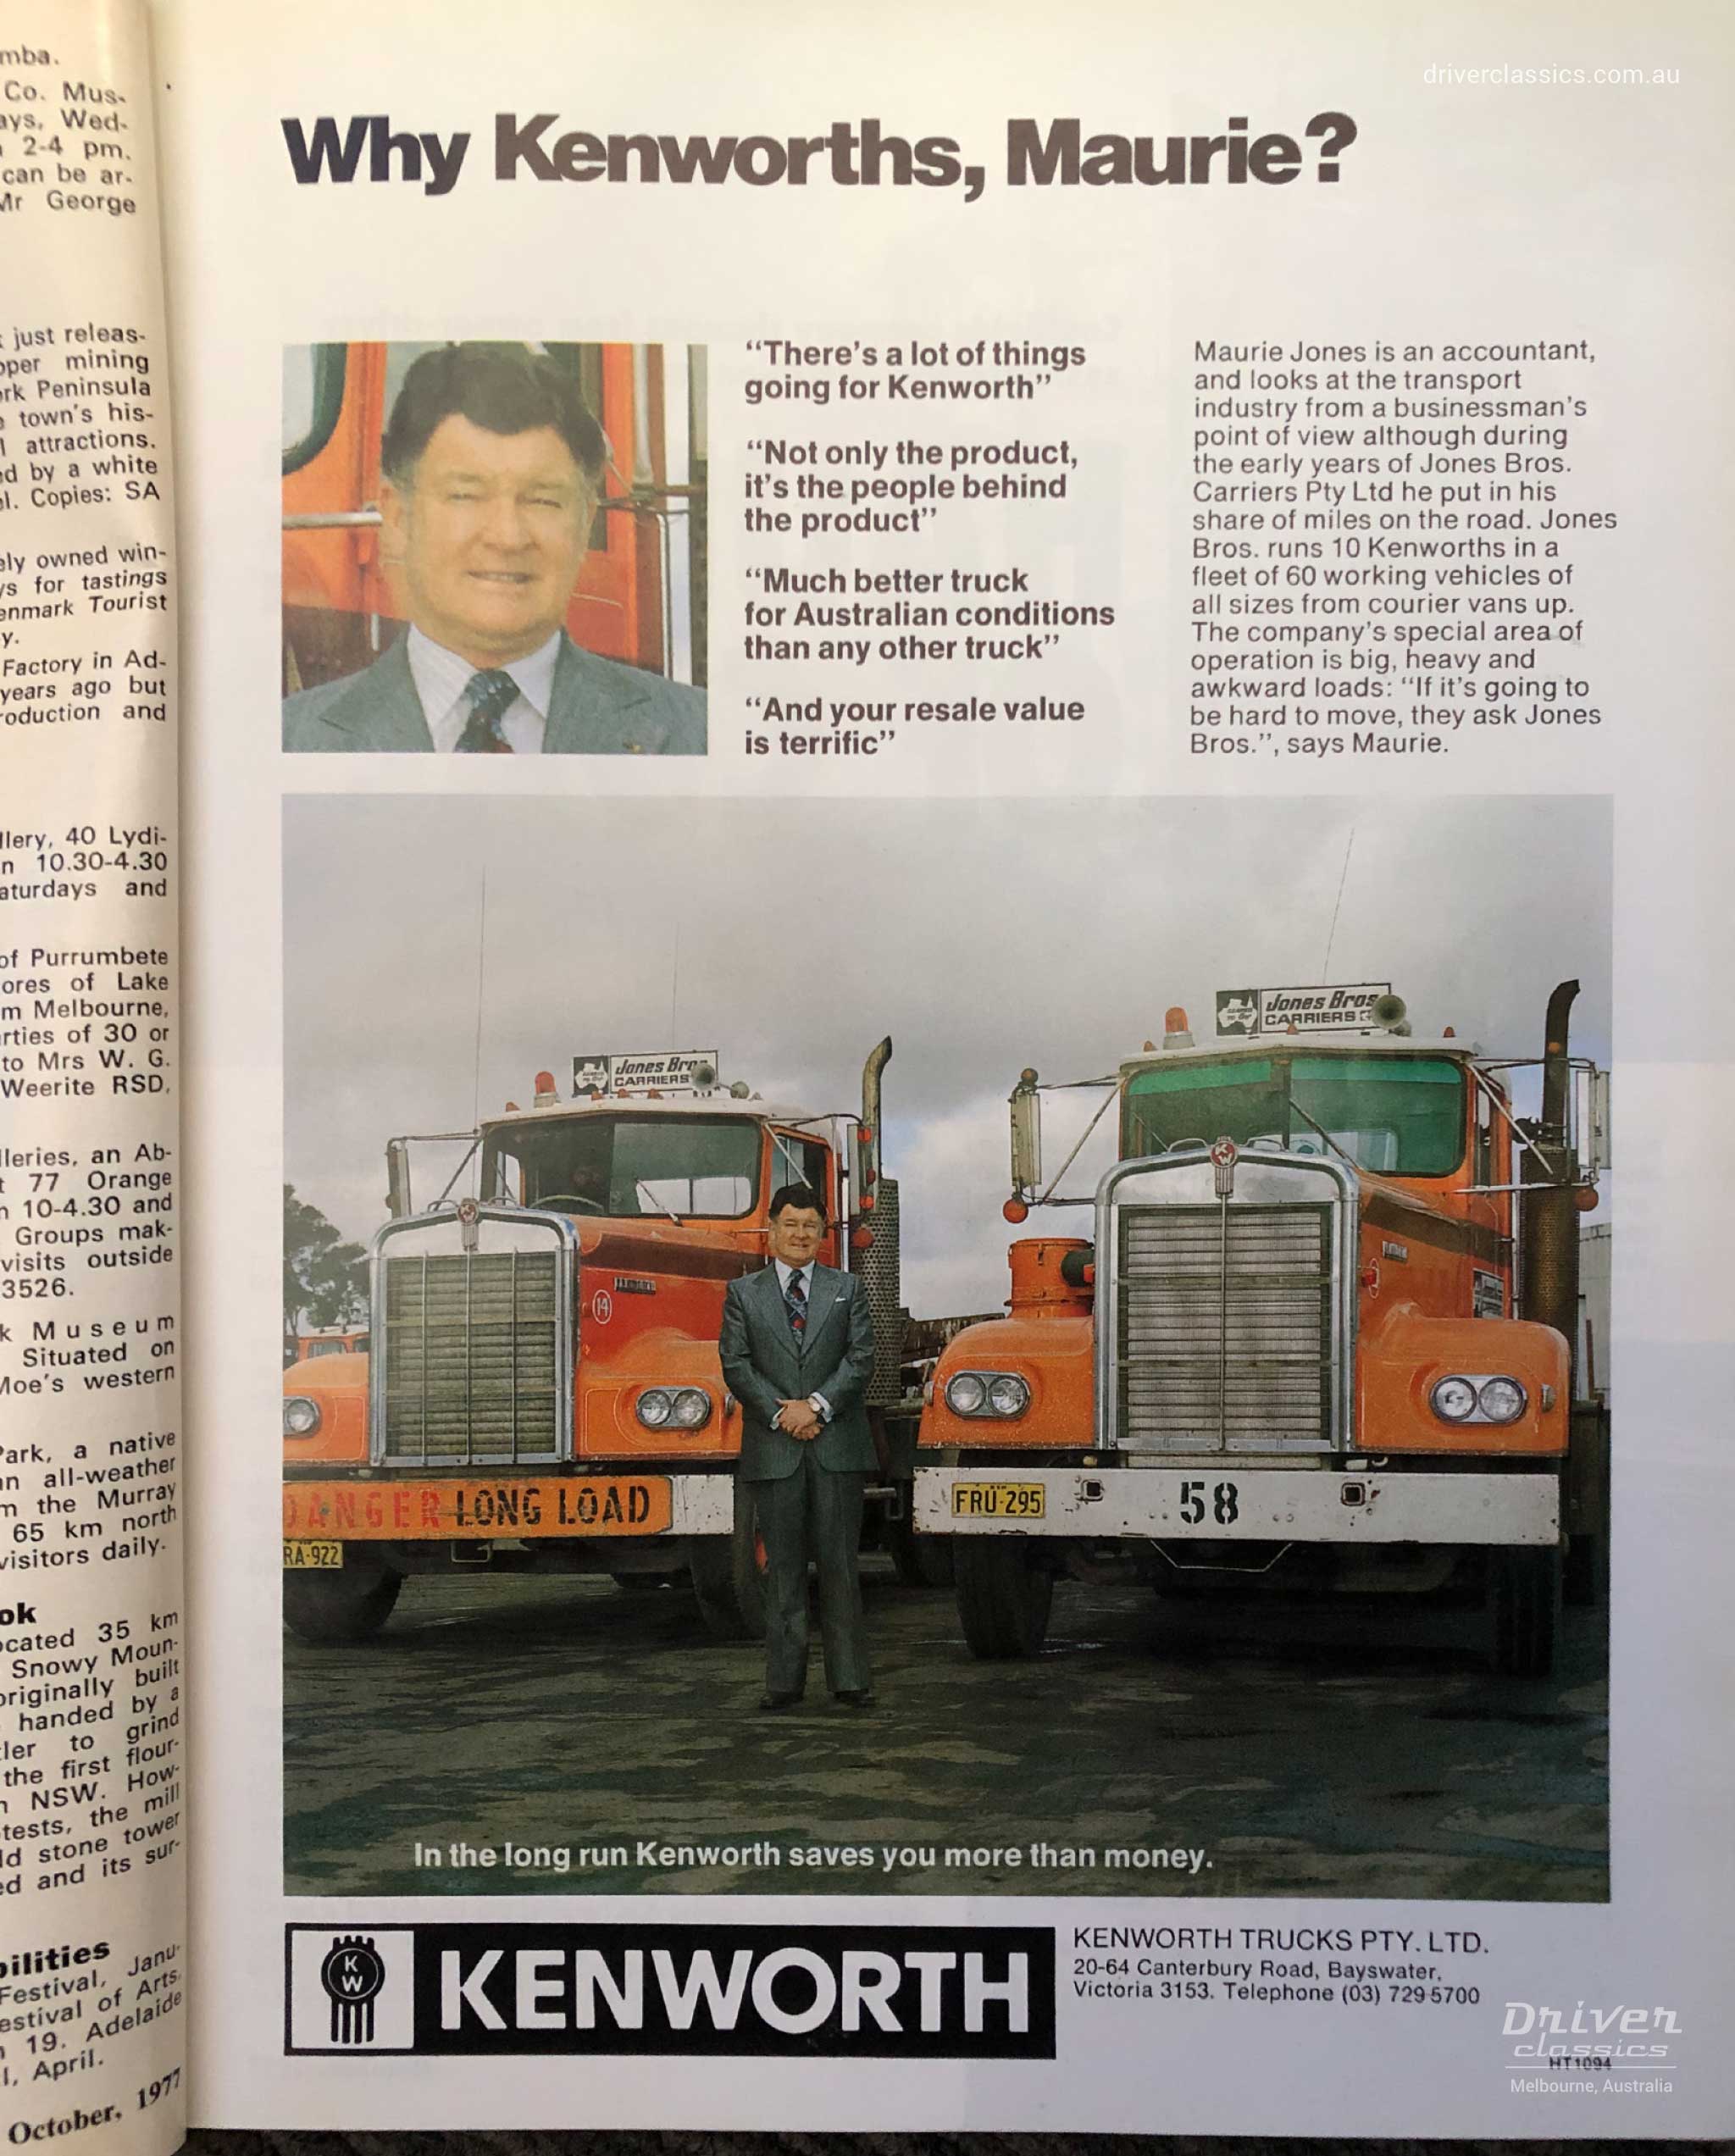 Kenworth Advertisement in Truck and Bus Transportation magazine, October 1977